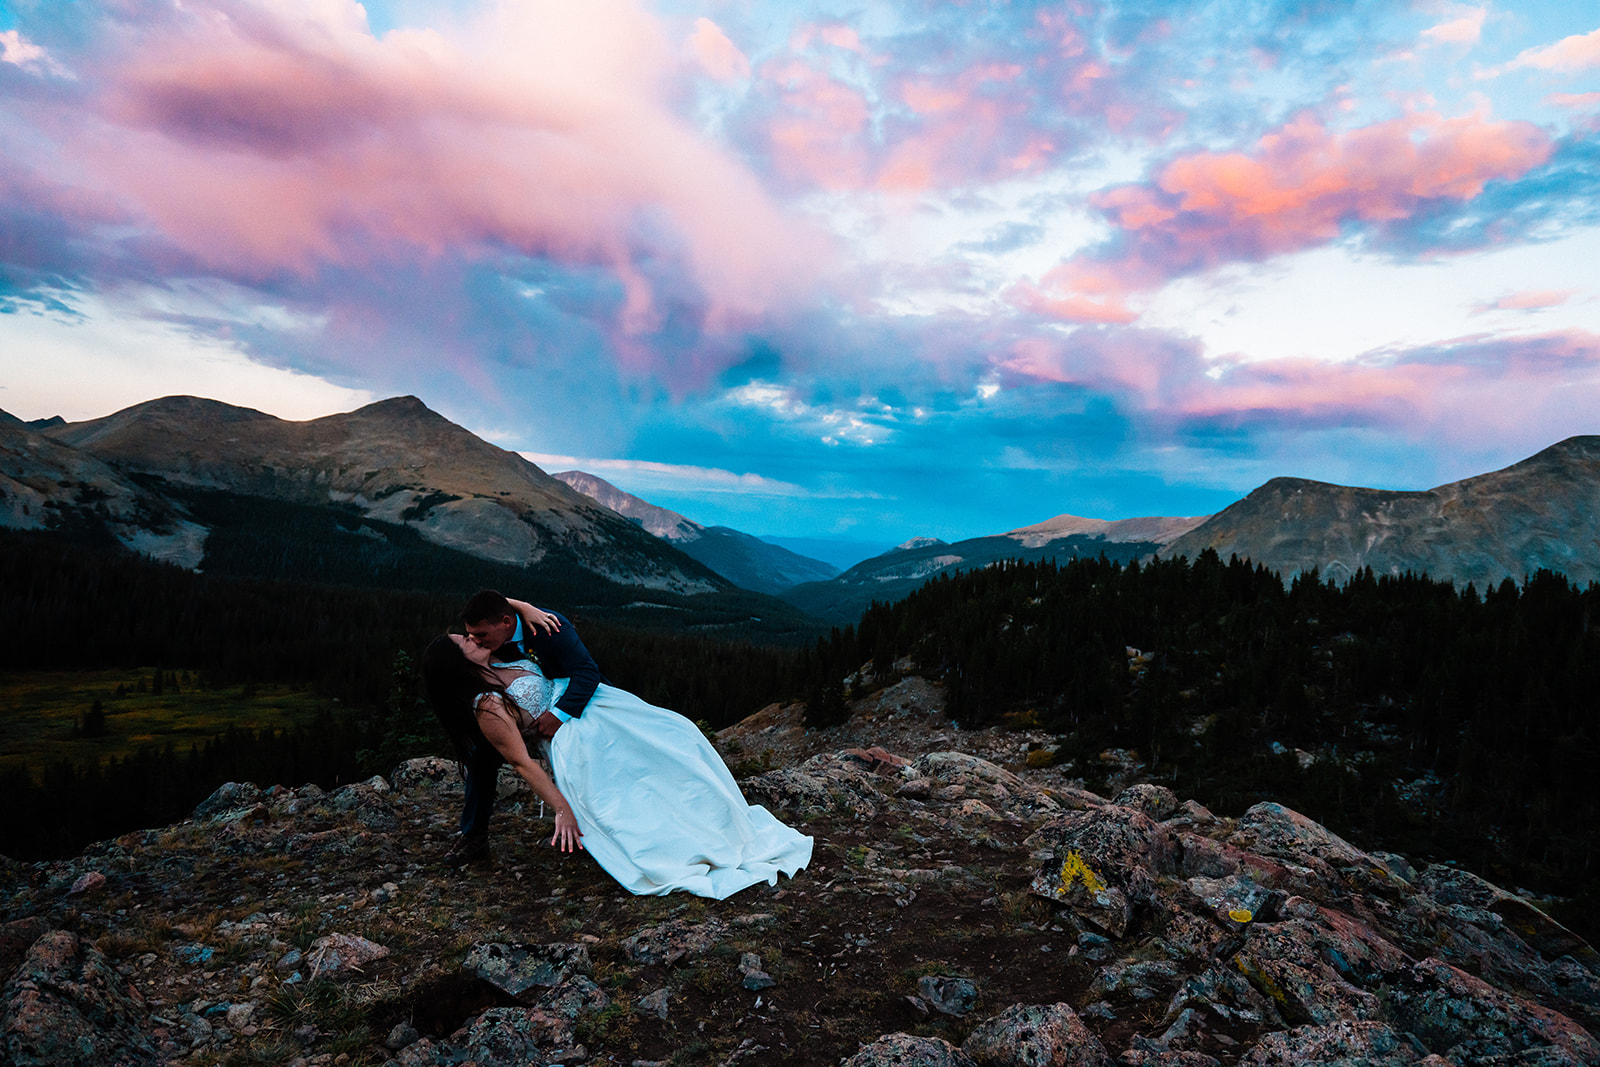 Groom dipping bride during sunset